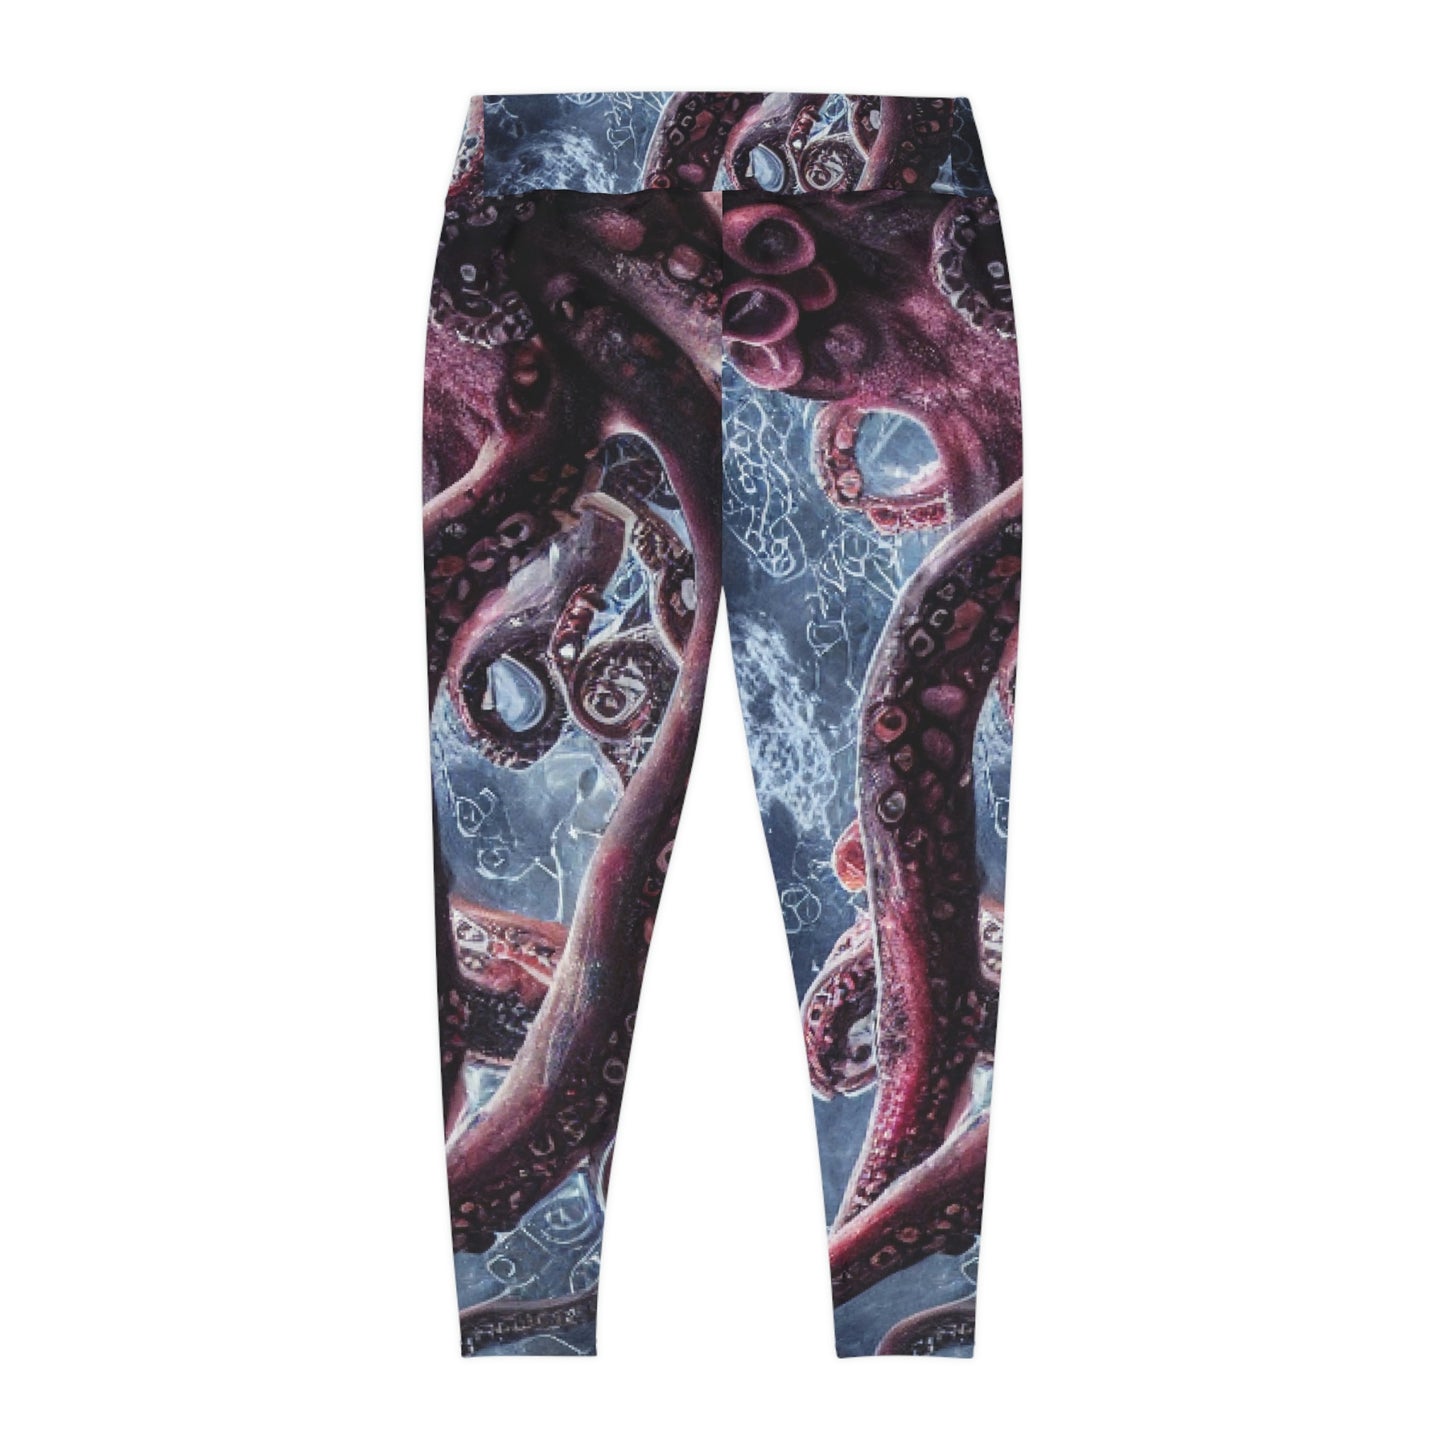 Octopus Beach Plus Size Leggings, One of a Kind Gift - Unique Workout Activewear tights for Mom fitness, Mothers Day, Girlfriend Christmas Gift